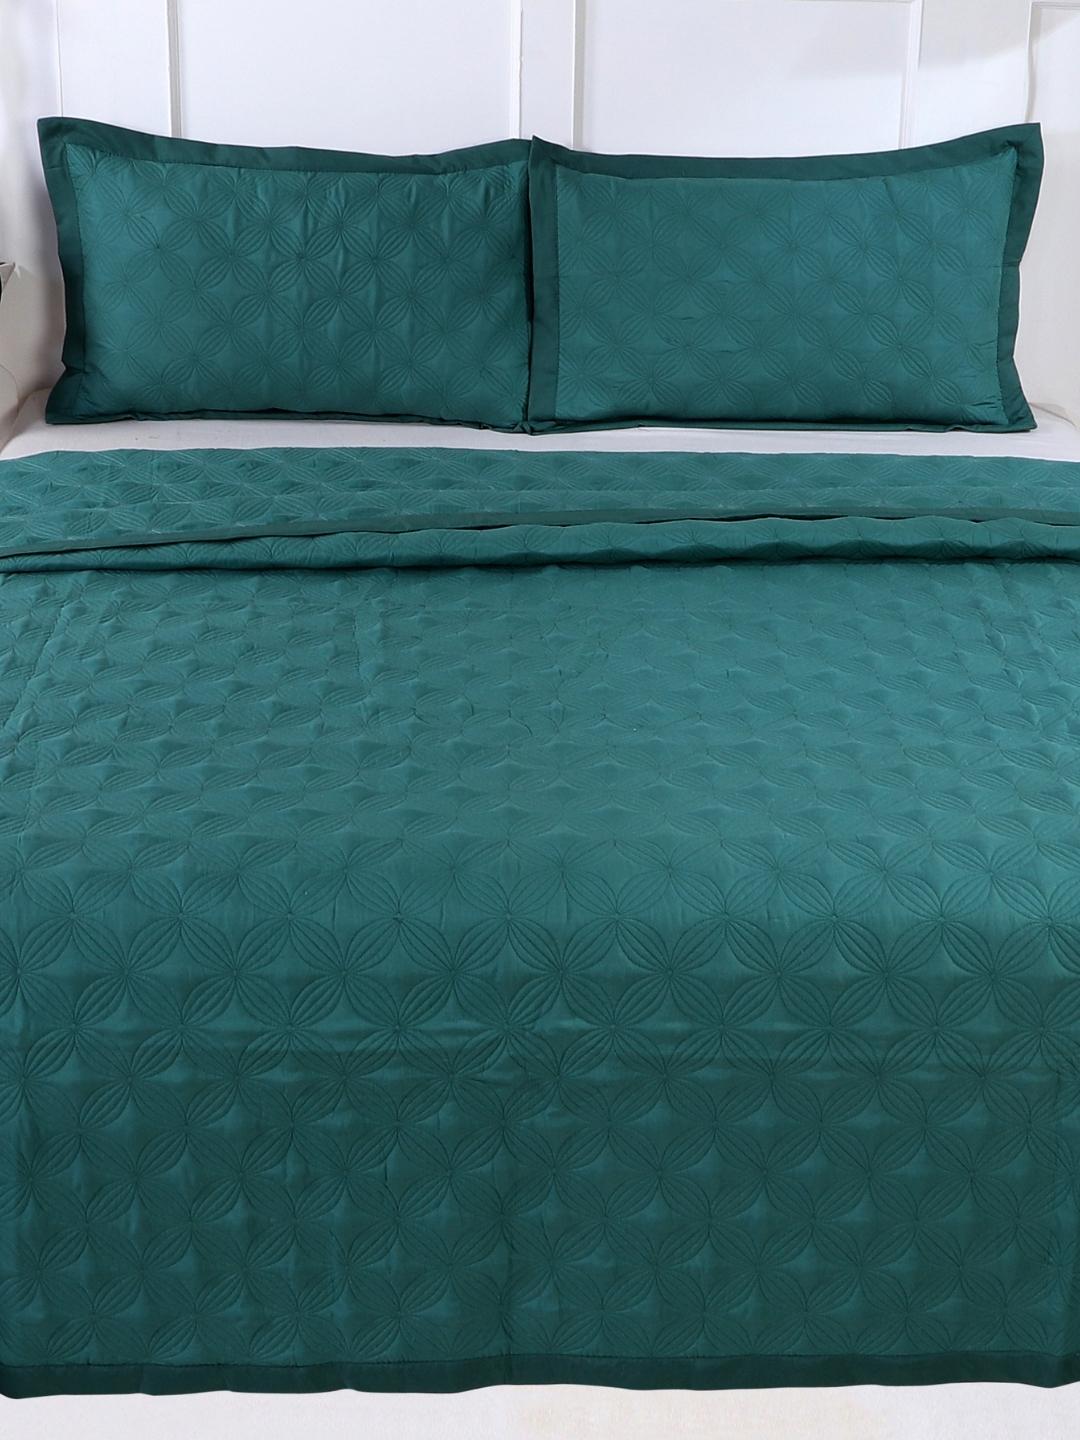 Double Bed Embroidered and Quilted Bedcover Set-Royal Green